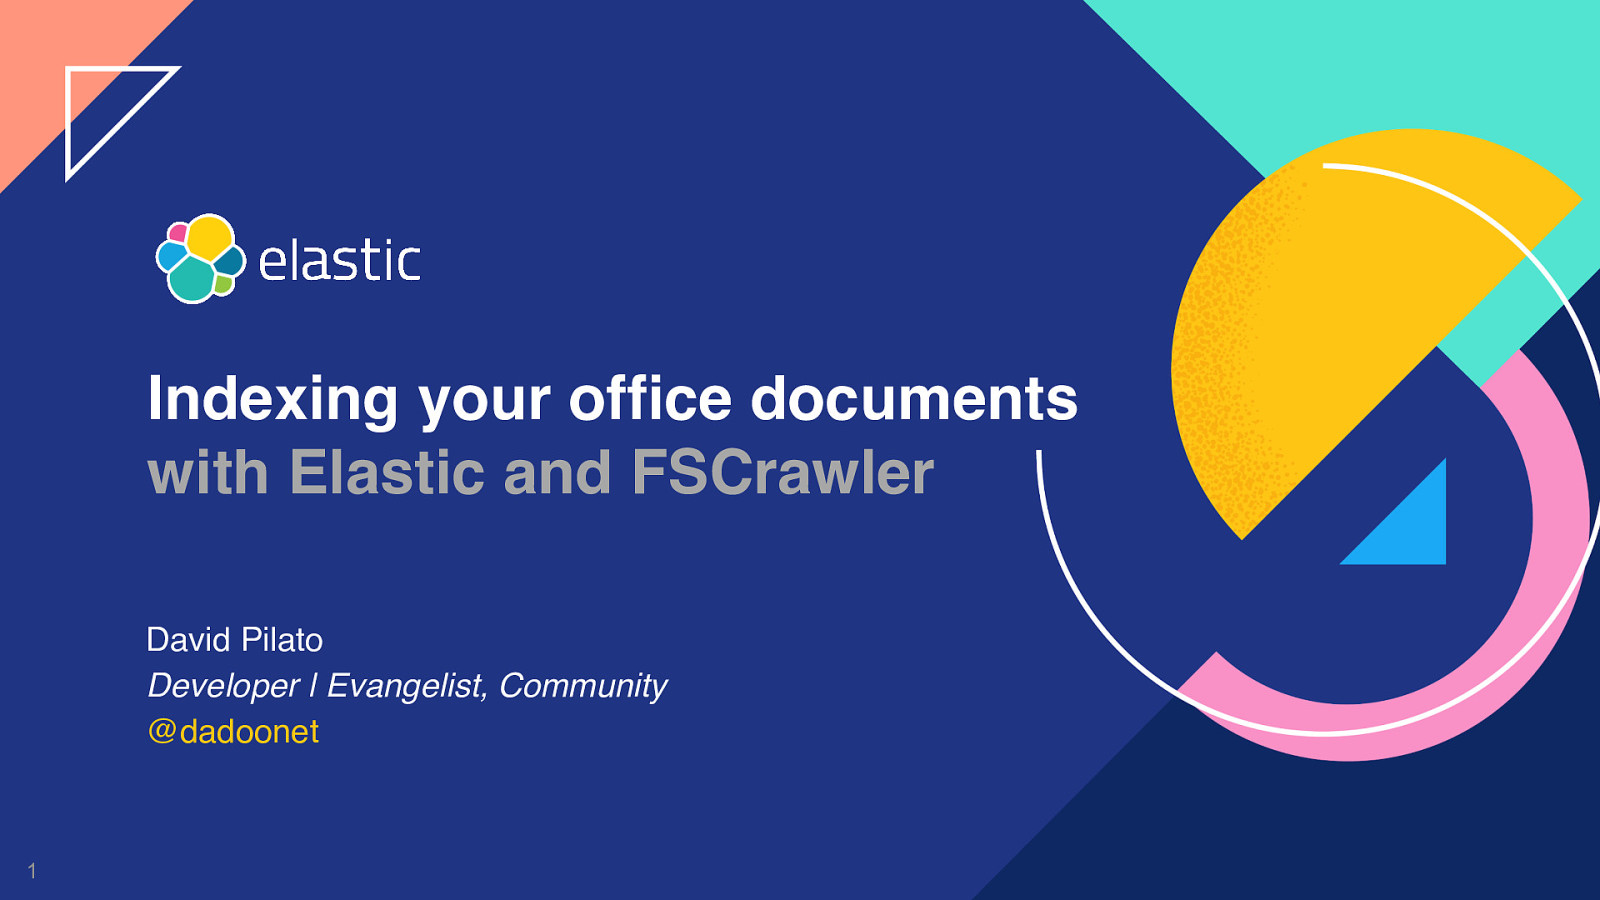 Indexing your office documents with Elastic stack and FSCrawler by David Pilato